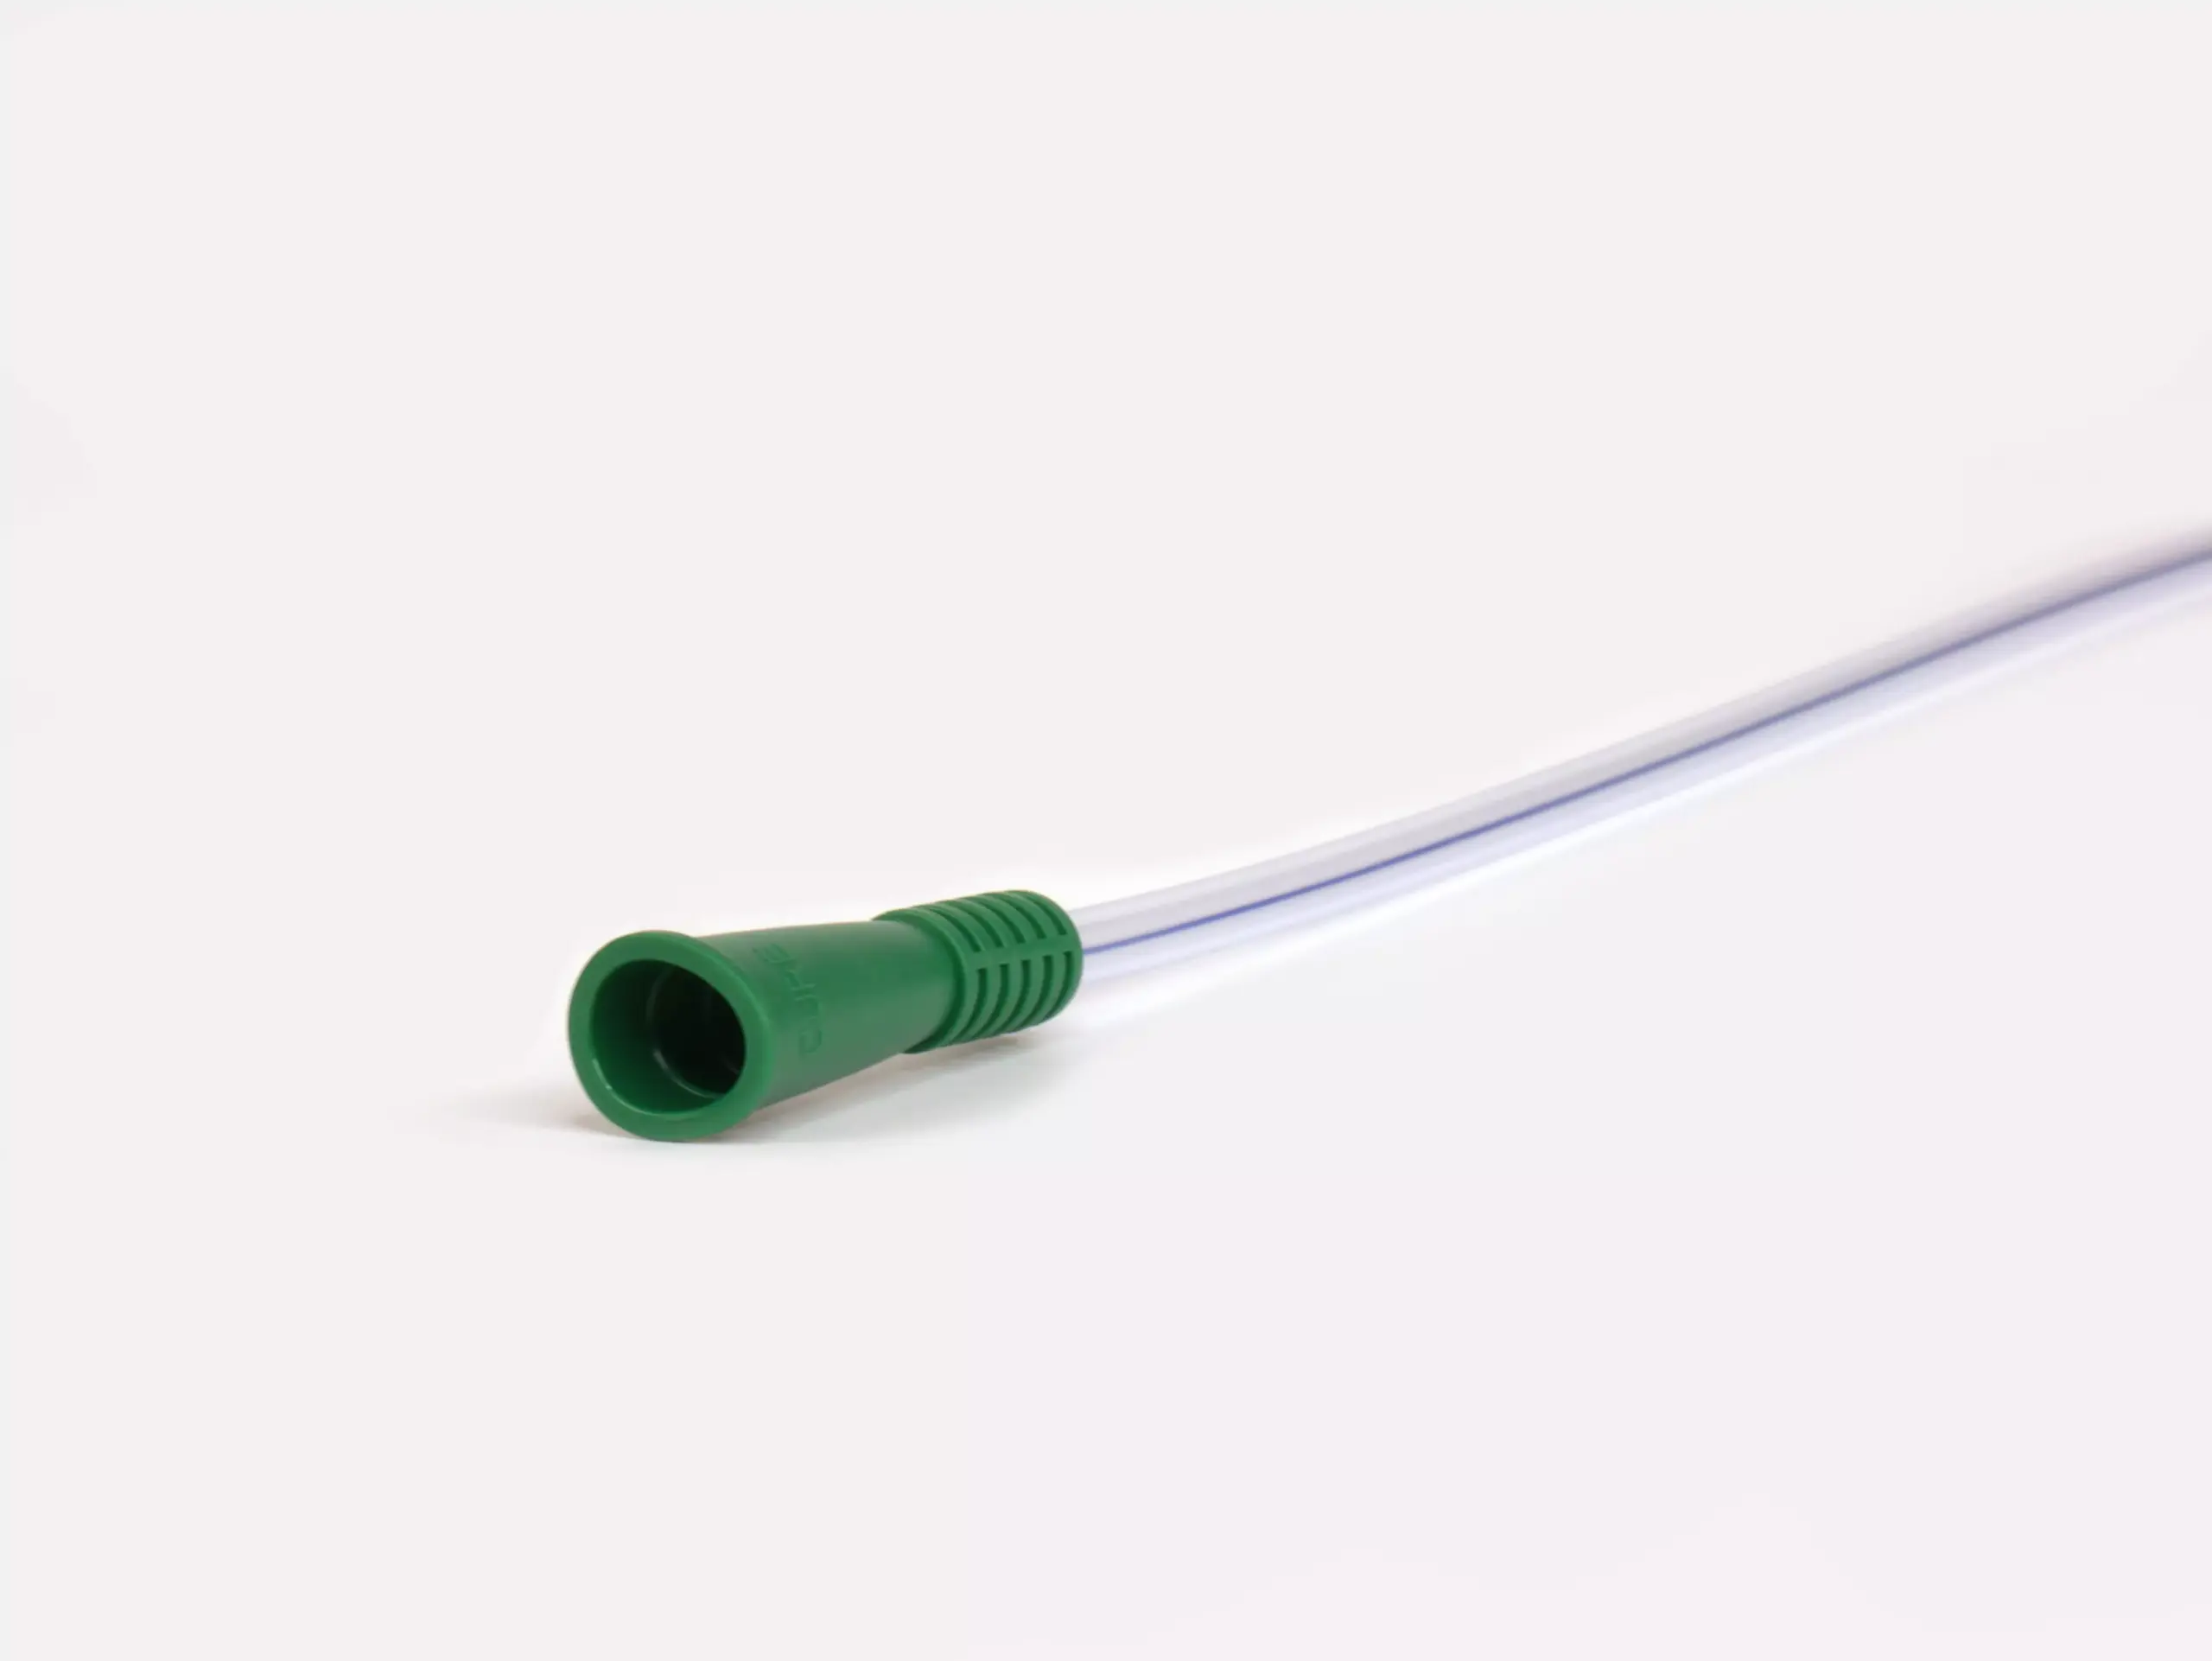 Macro shot highlighting the intricate details at the base of a Cure brand catheter by RA Fischer Co., accentuated by its green grip.